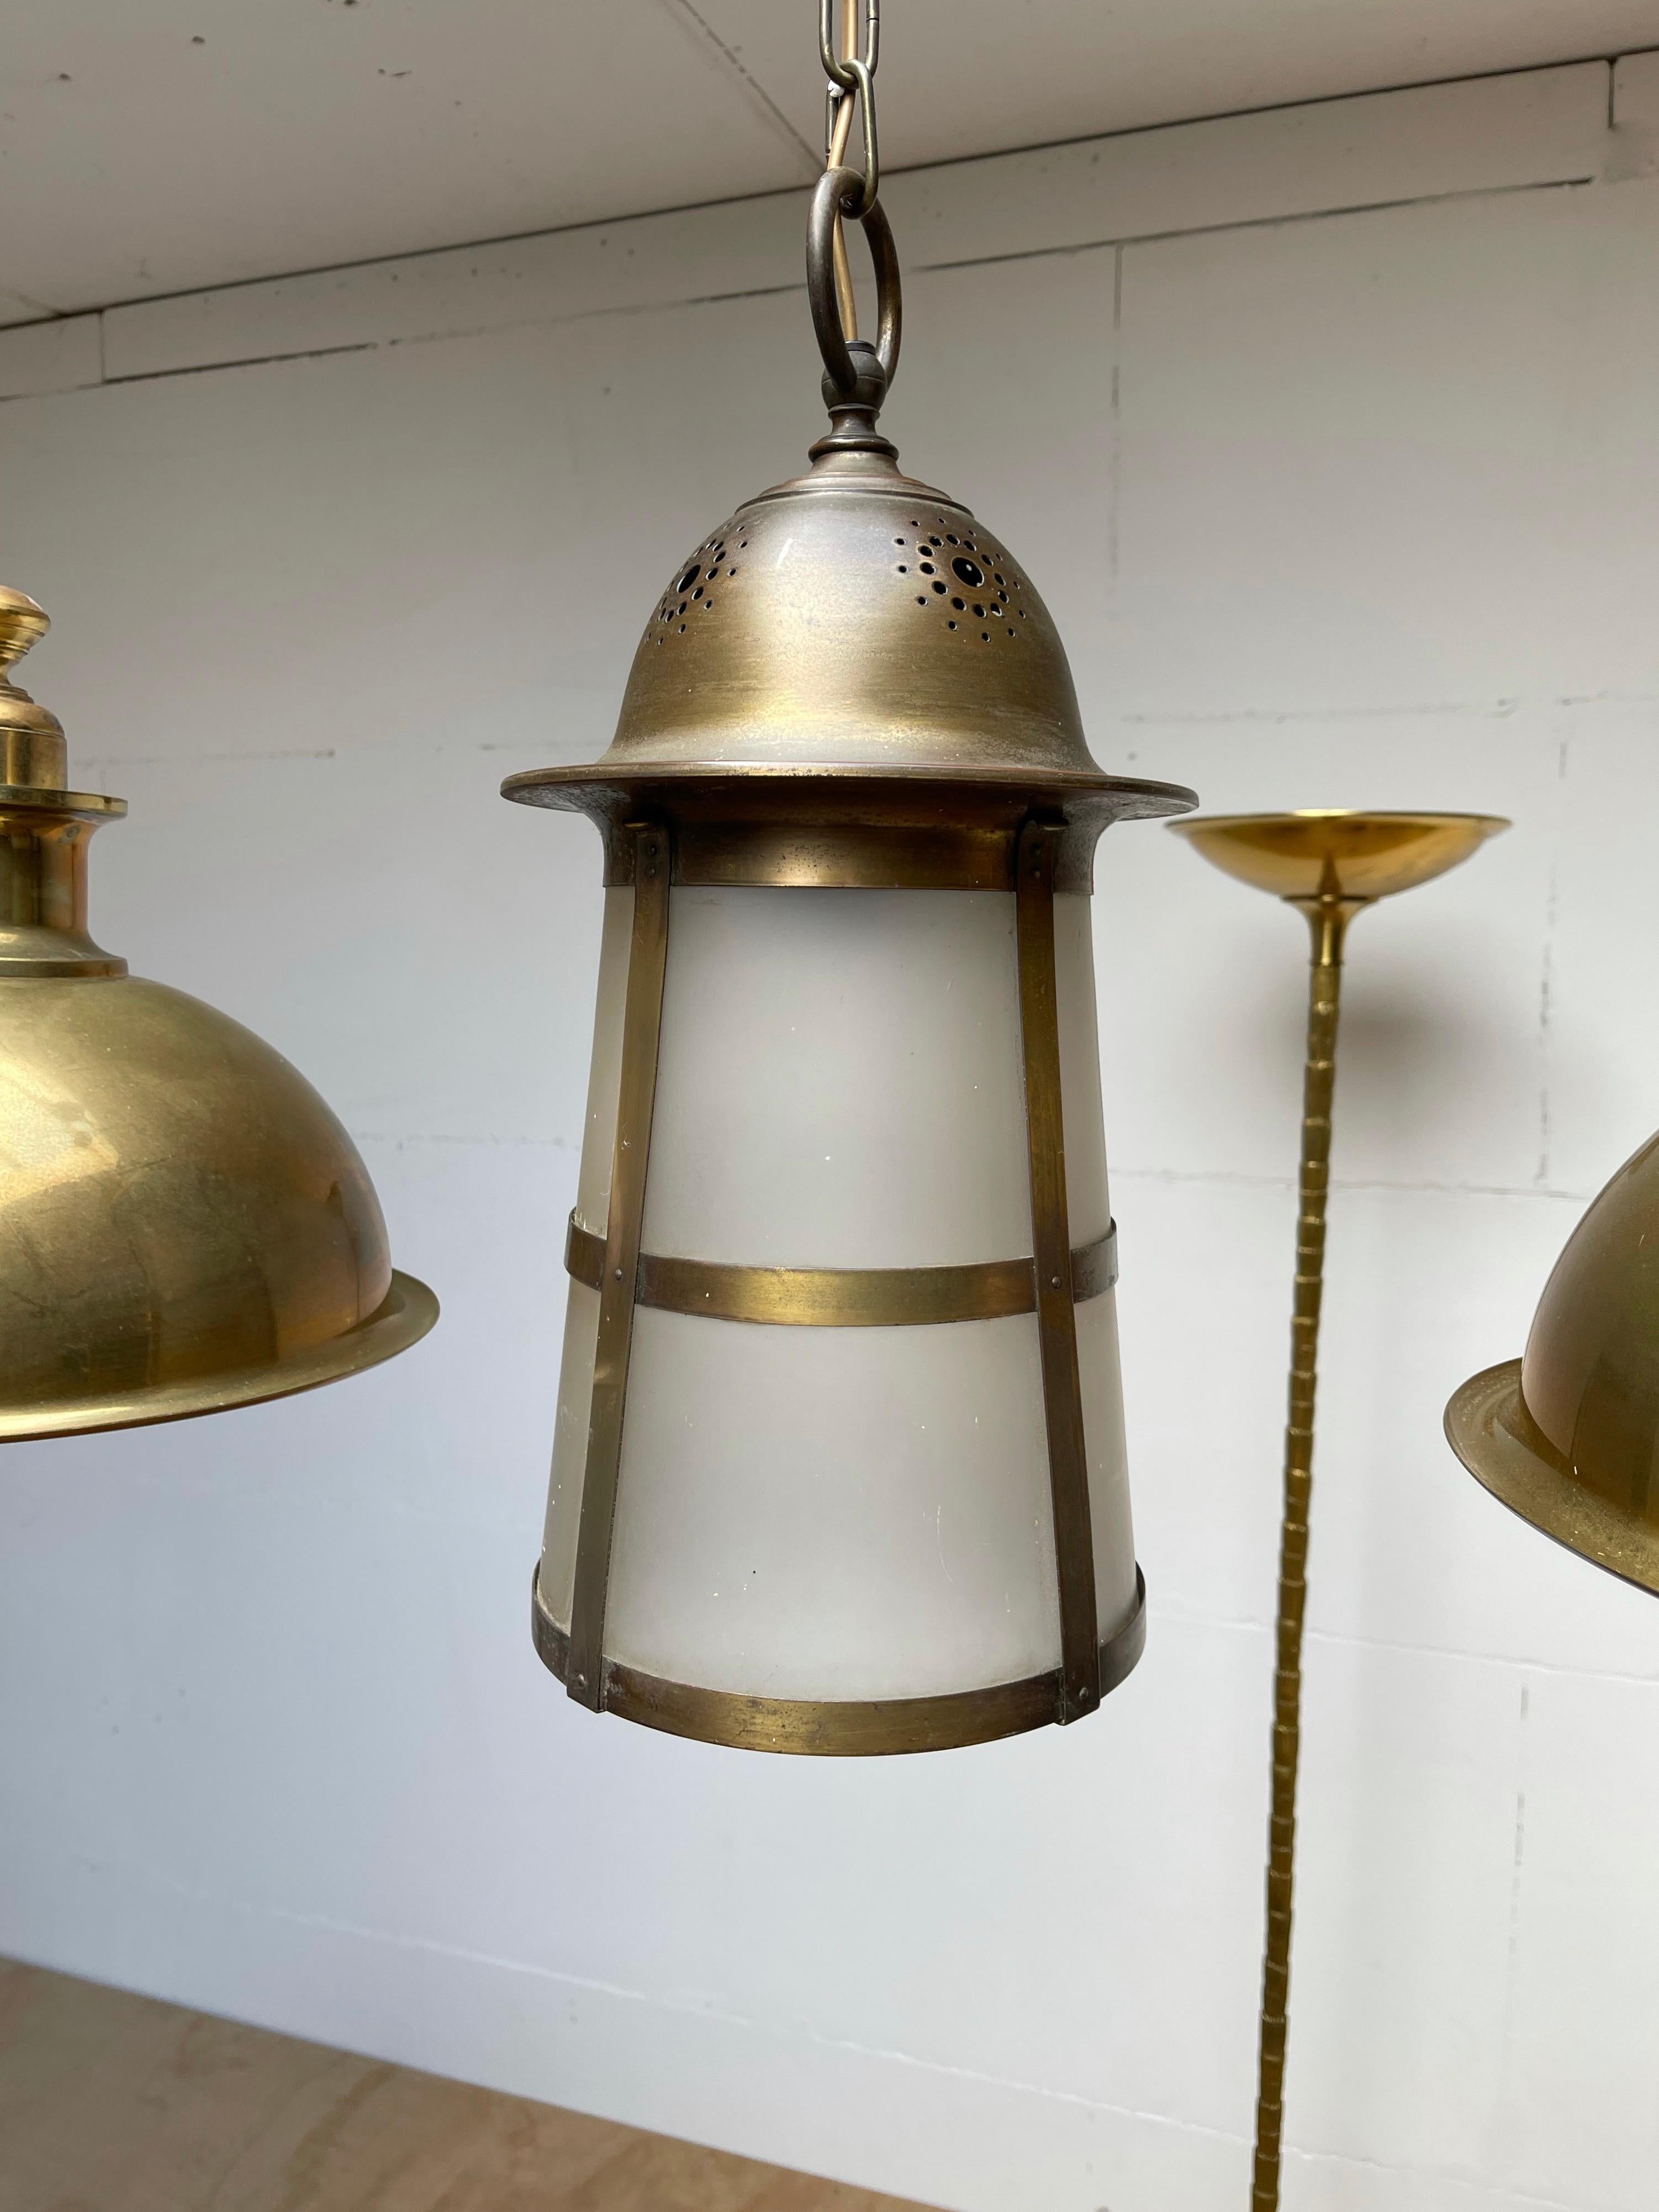 Hand-Crafted Highly Stylish Brass and Glass Arts & Crafts Pendant Light, 1910 Berlage Style